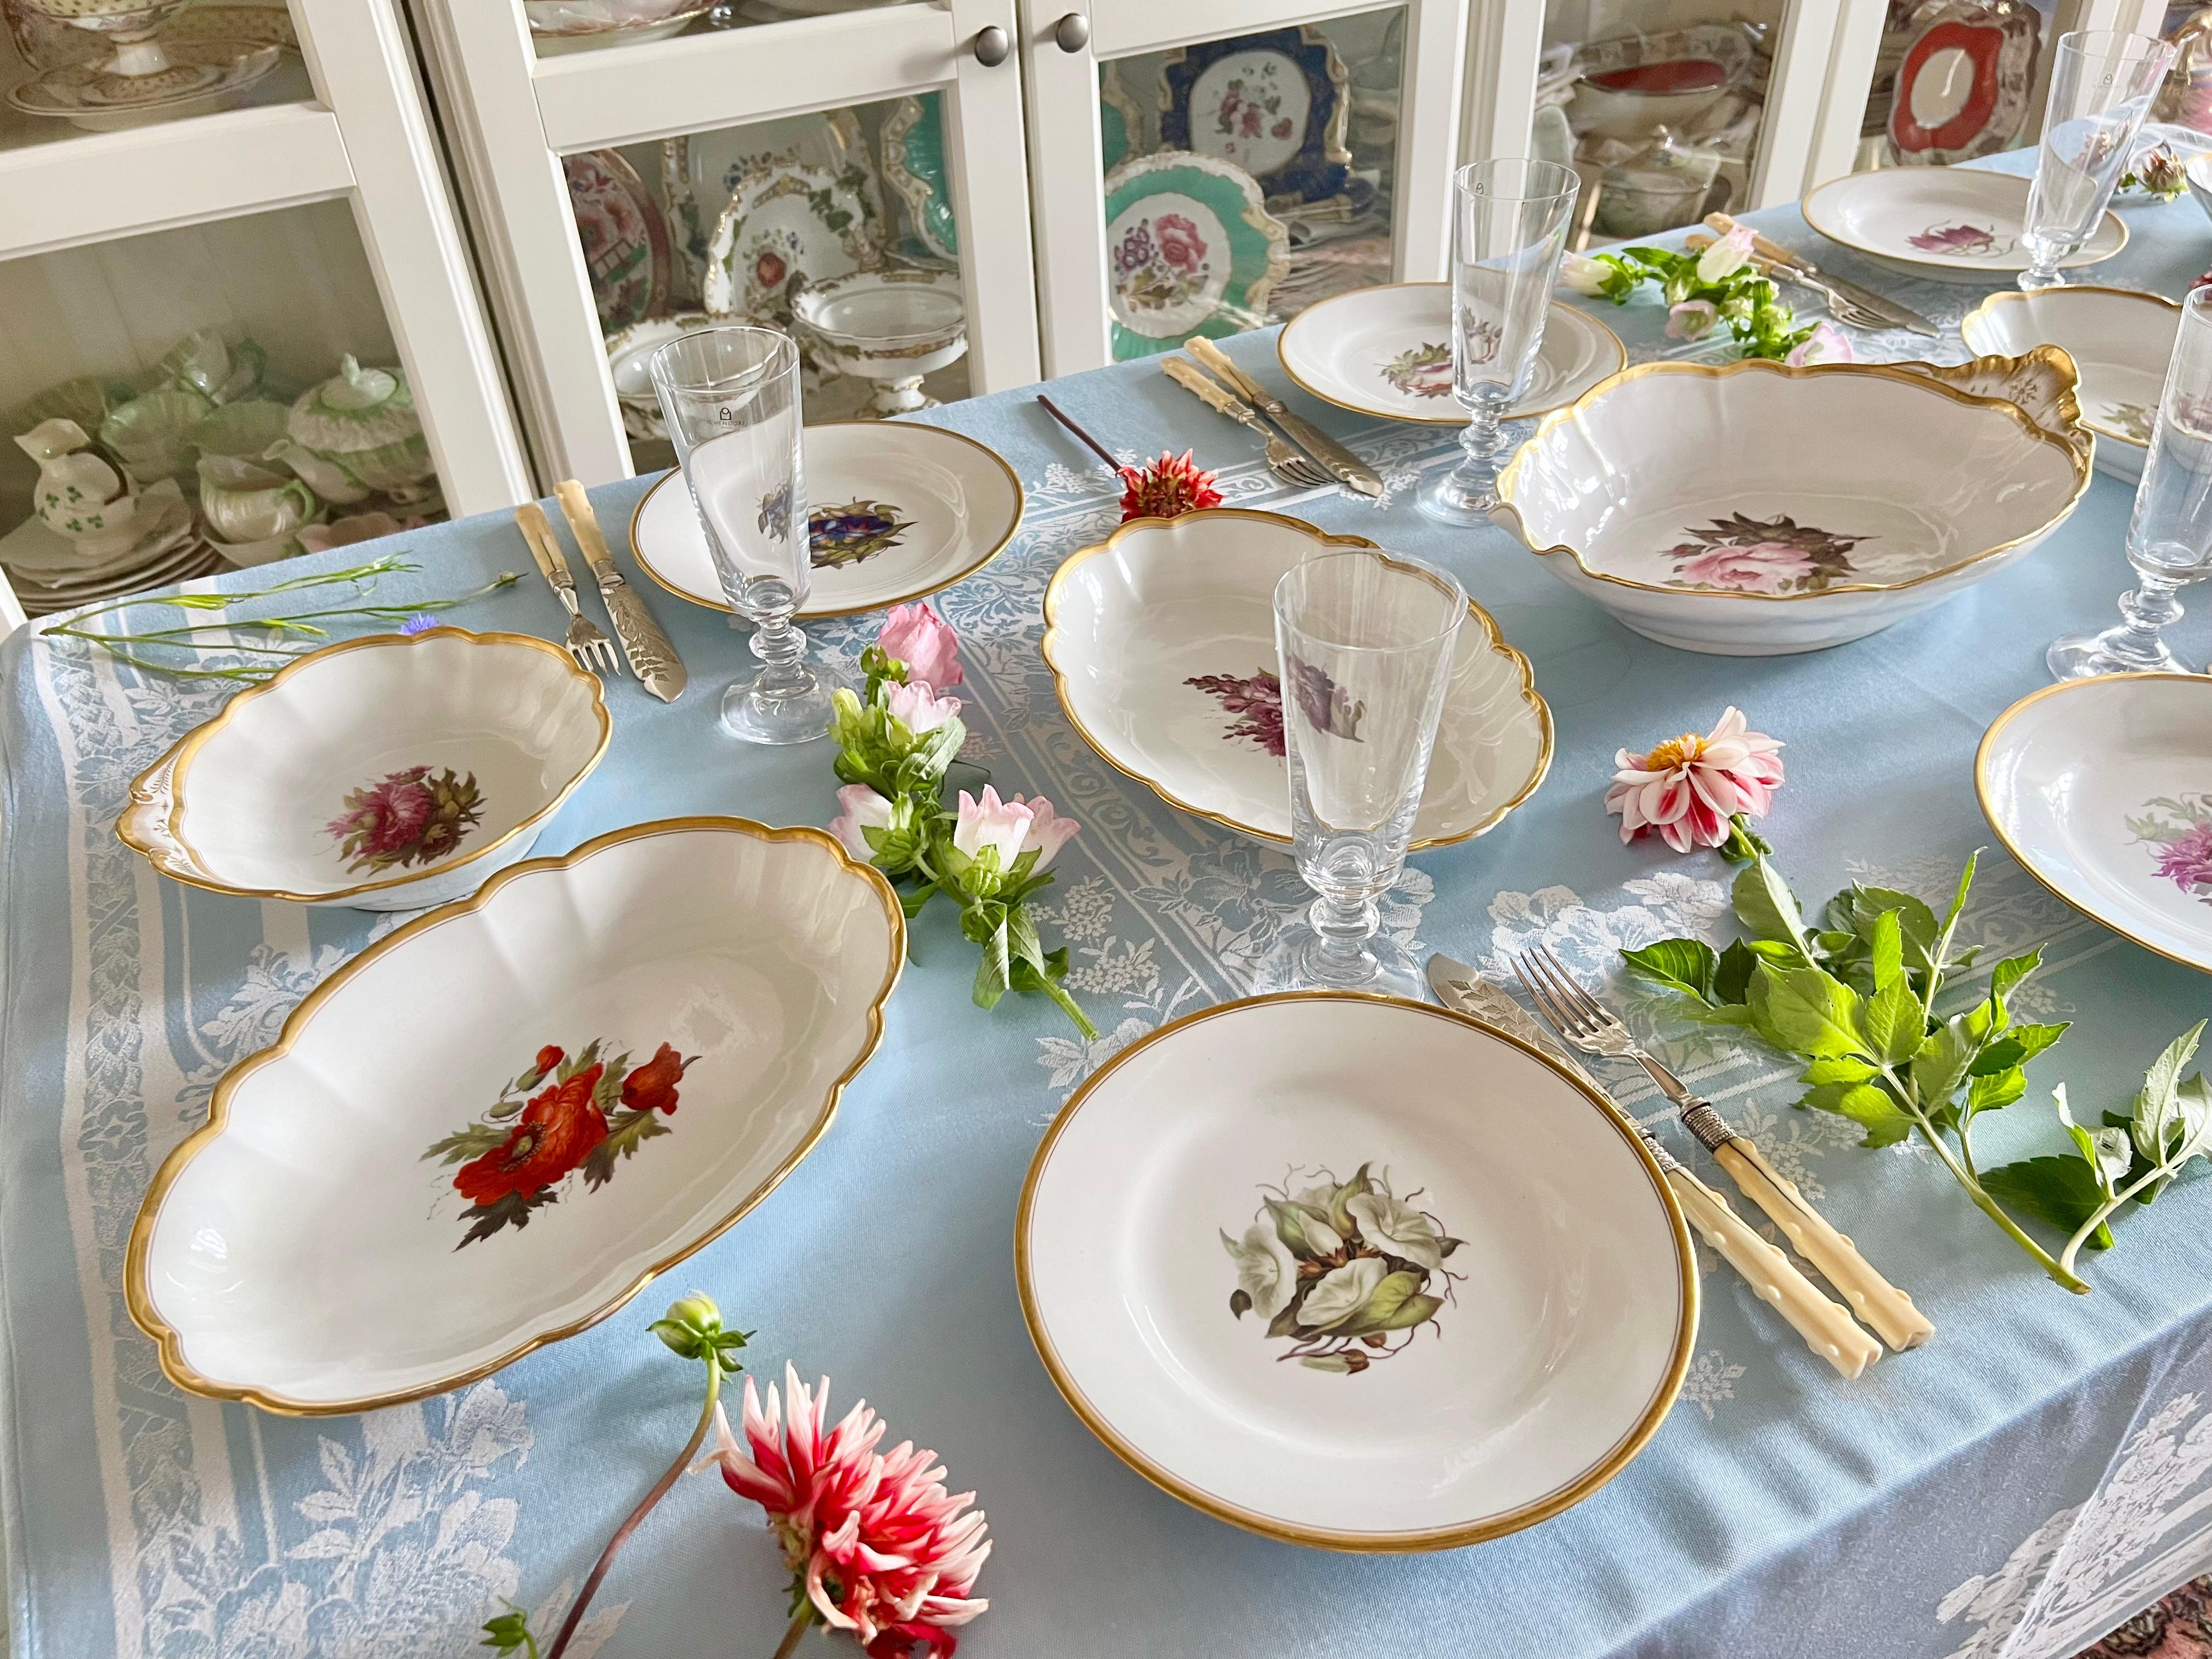 This is a stunning part dessert service made by Barr Flight & Barr in Worcester, and painted with naturalistic flowers by William Billingsley between 1808 and 1810. The service consists of one deep central oval dish, four slightly smaller oval